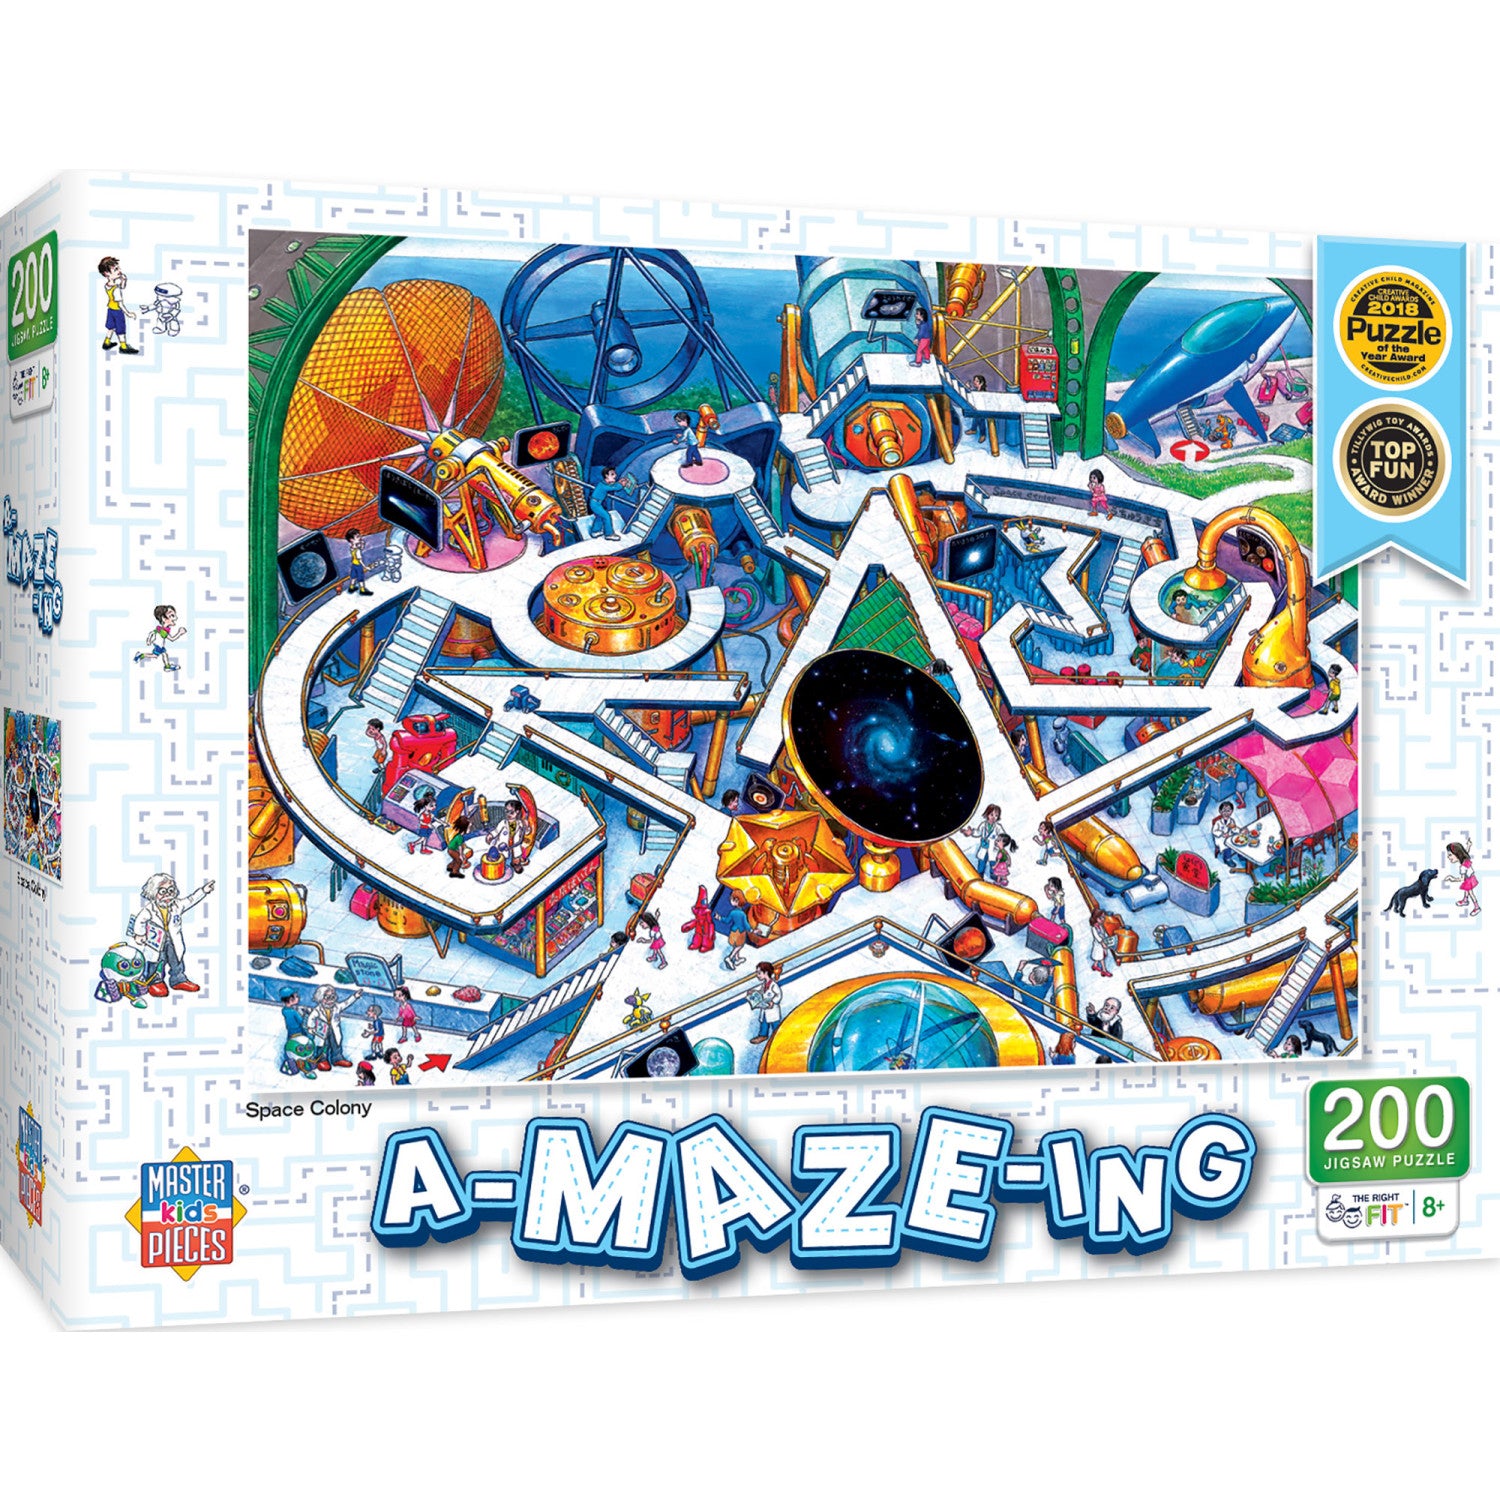 A-Maze-ing - Space Colony 200 Piece Jigsaw Puzzle